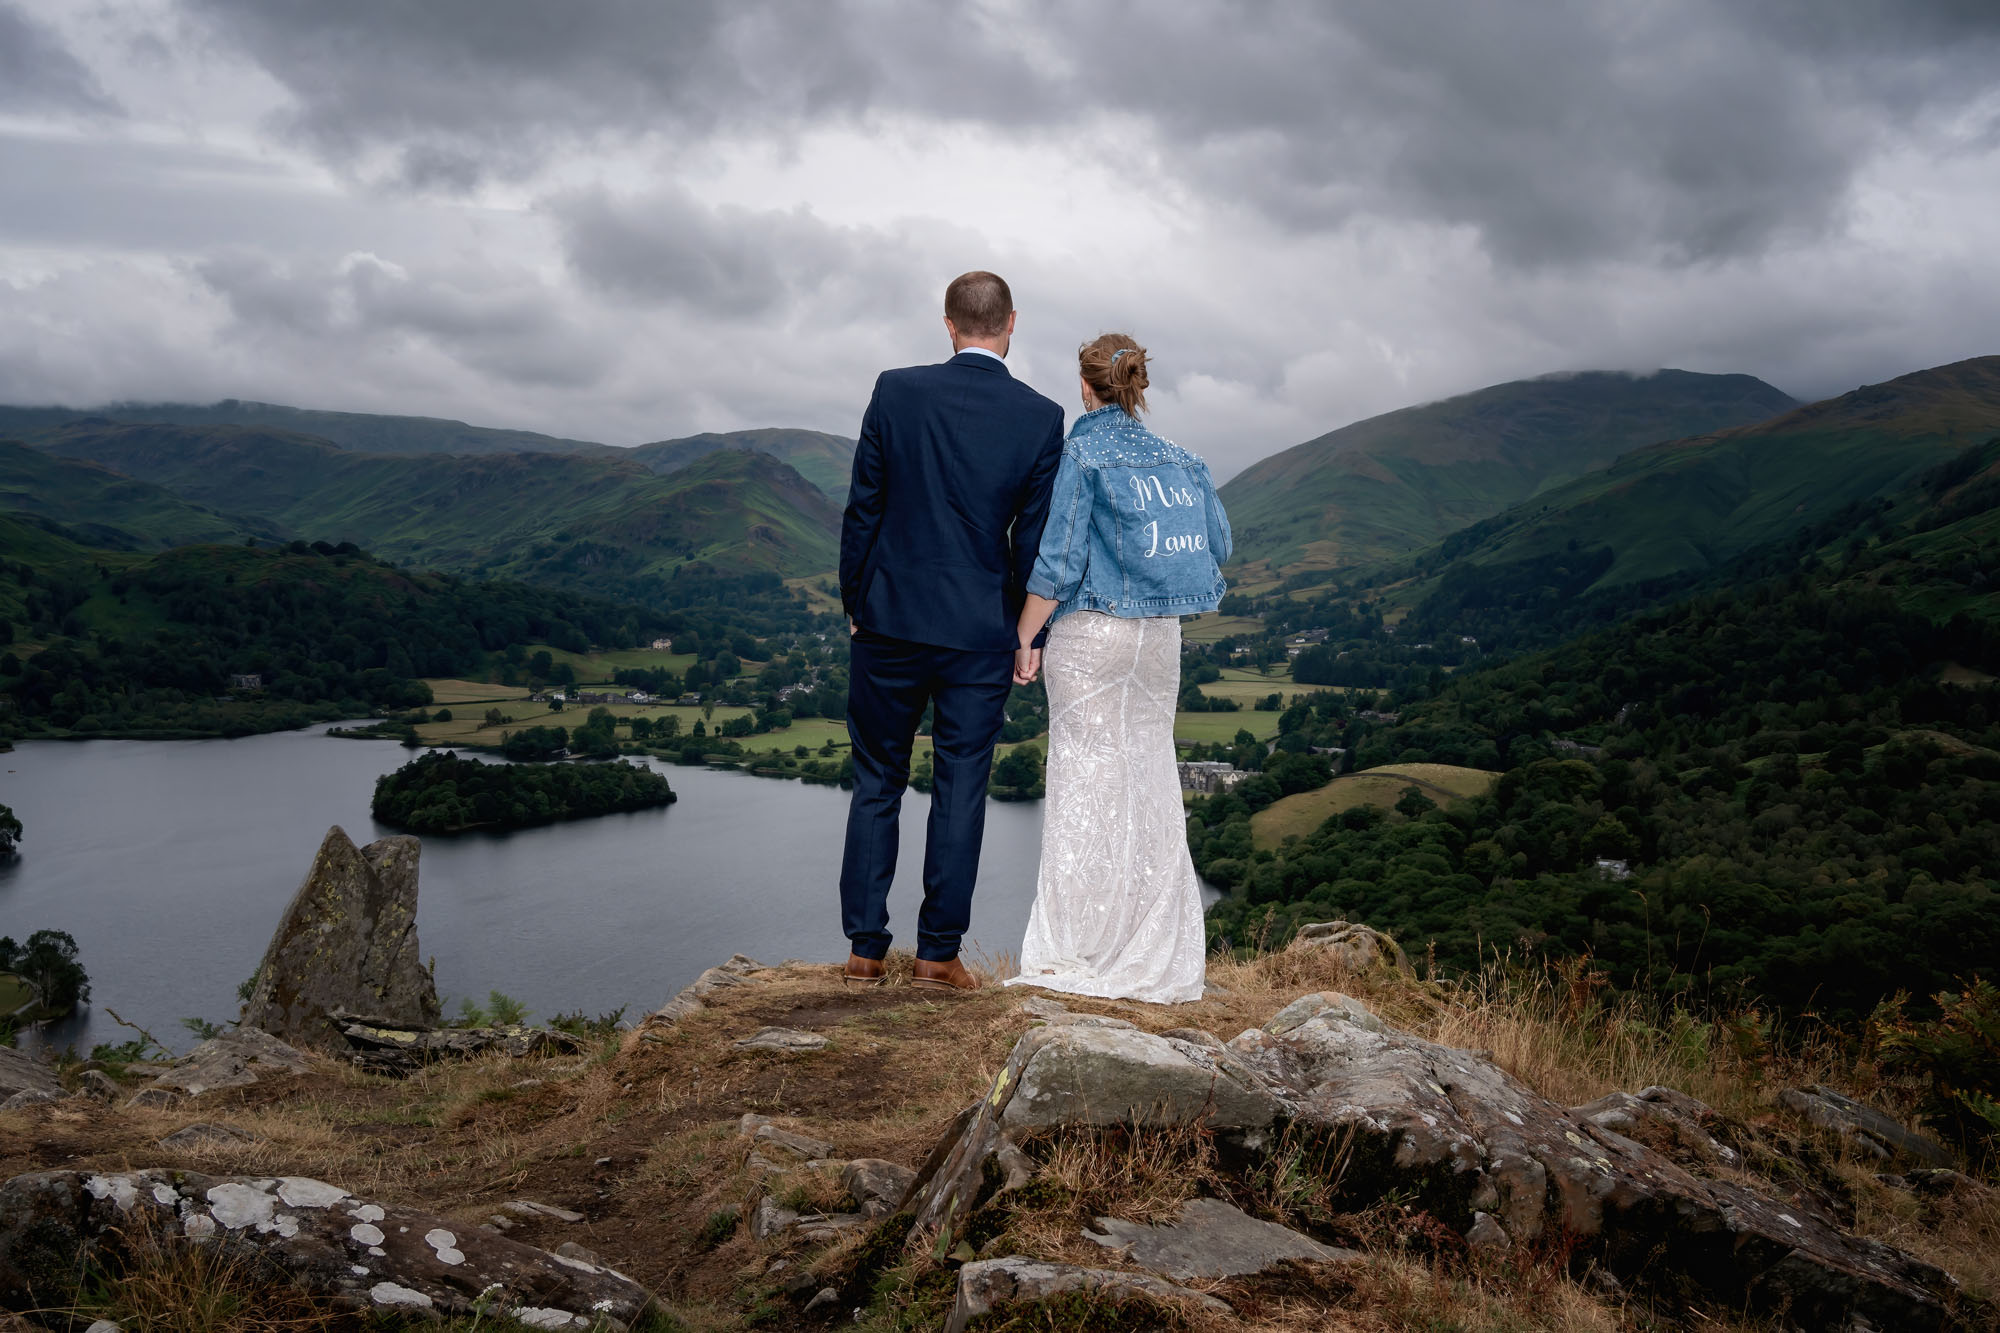 A couple stand on a mountainside looking over a lake. She's wearing a long white skirt and denim jacket. He's in a dark suit. By Jaye-Peg Photography in Cumbria